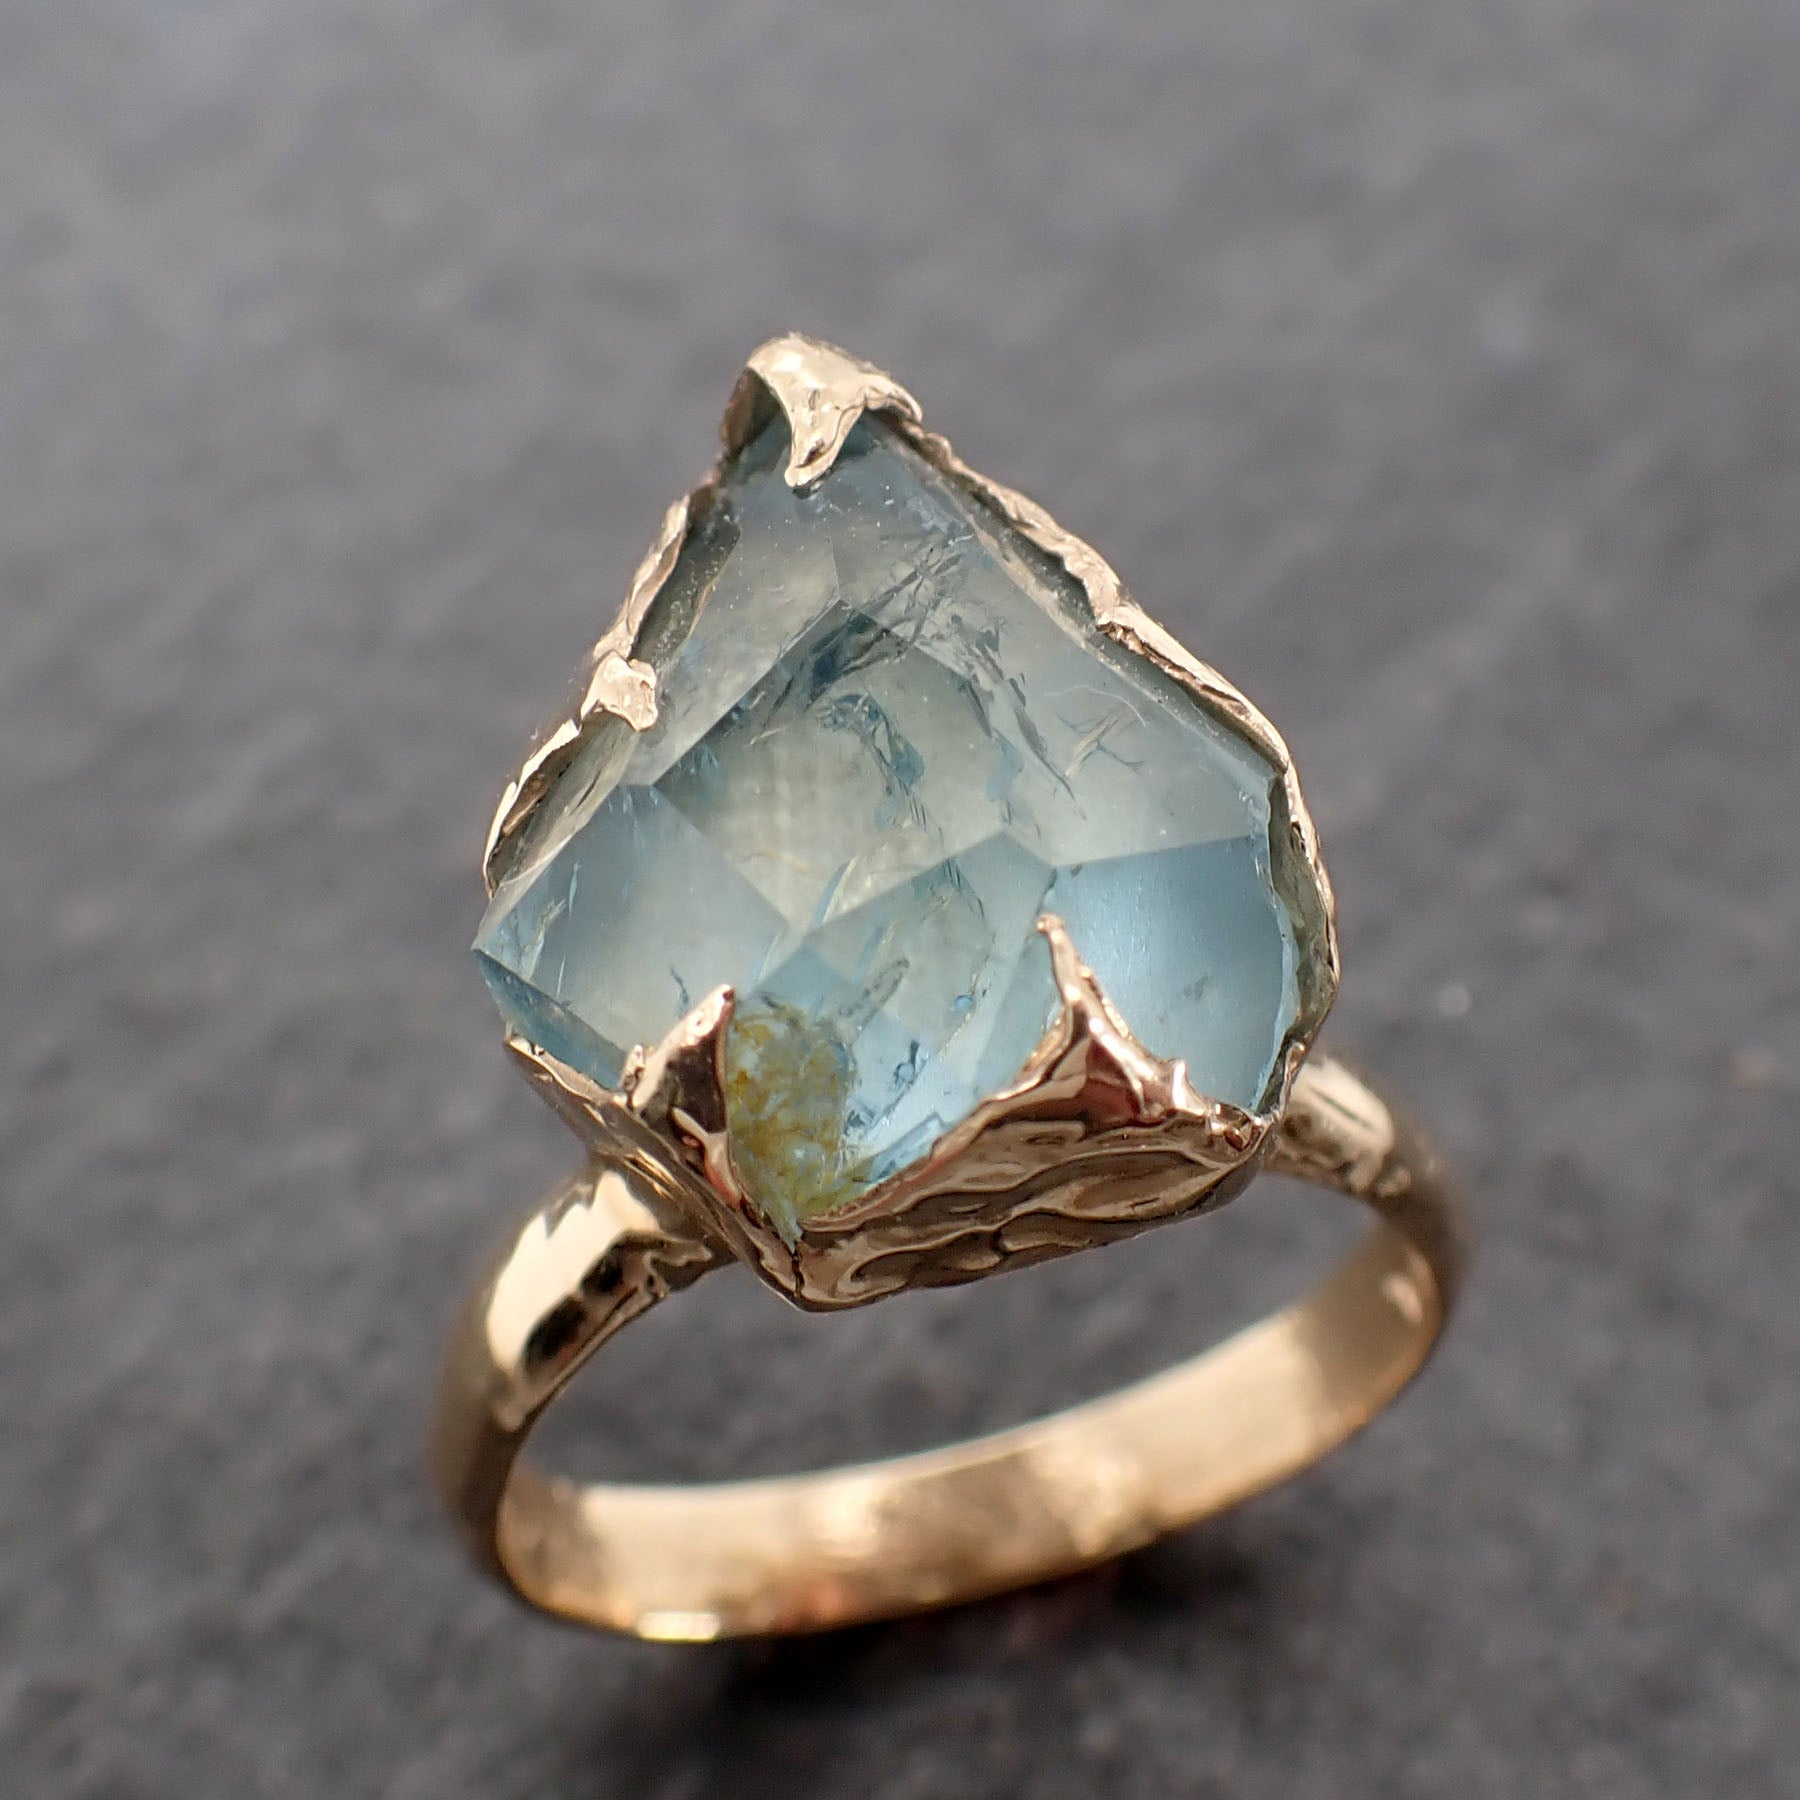 Partially faceted Aquamarine Solitaire Ring 14k gold Custom One Of a Kind Gemstone Ring Bespoke byAngeline 2530